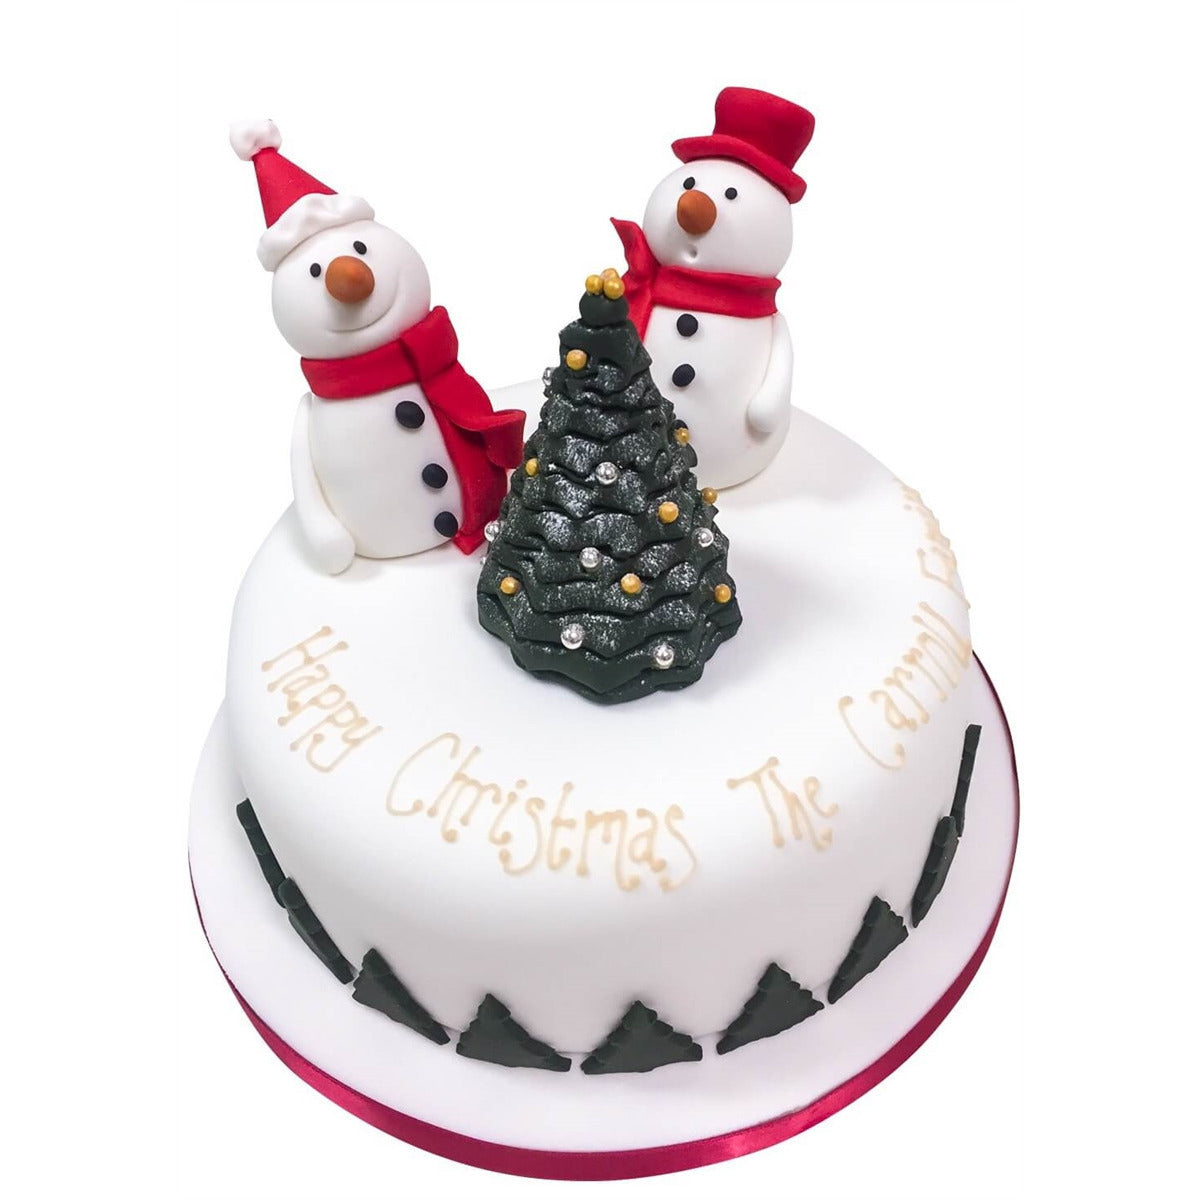 Snowman Cake Ideas for Christmas | Home, Garden and Crochet Patterns and  Tutorials